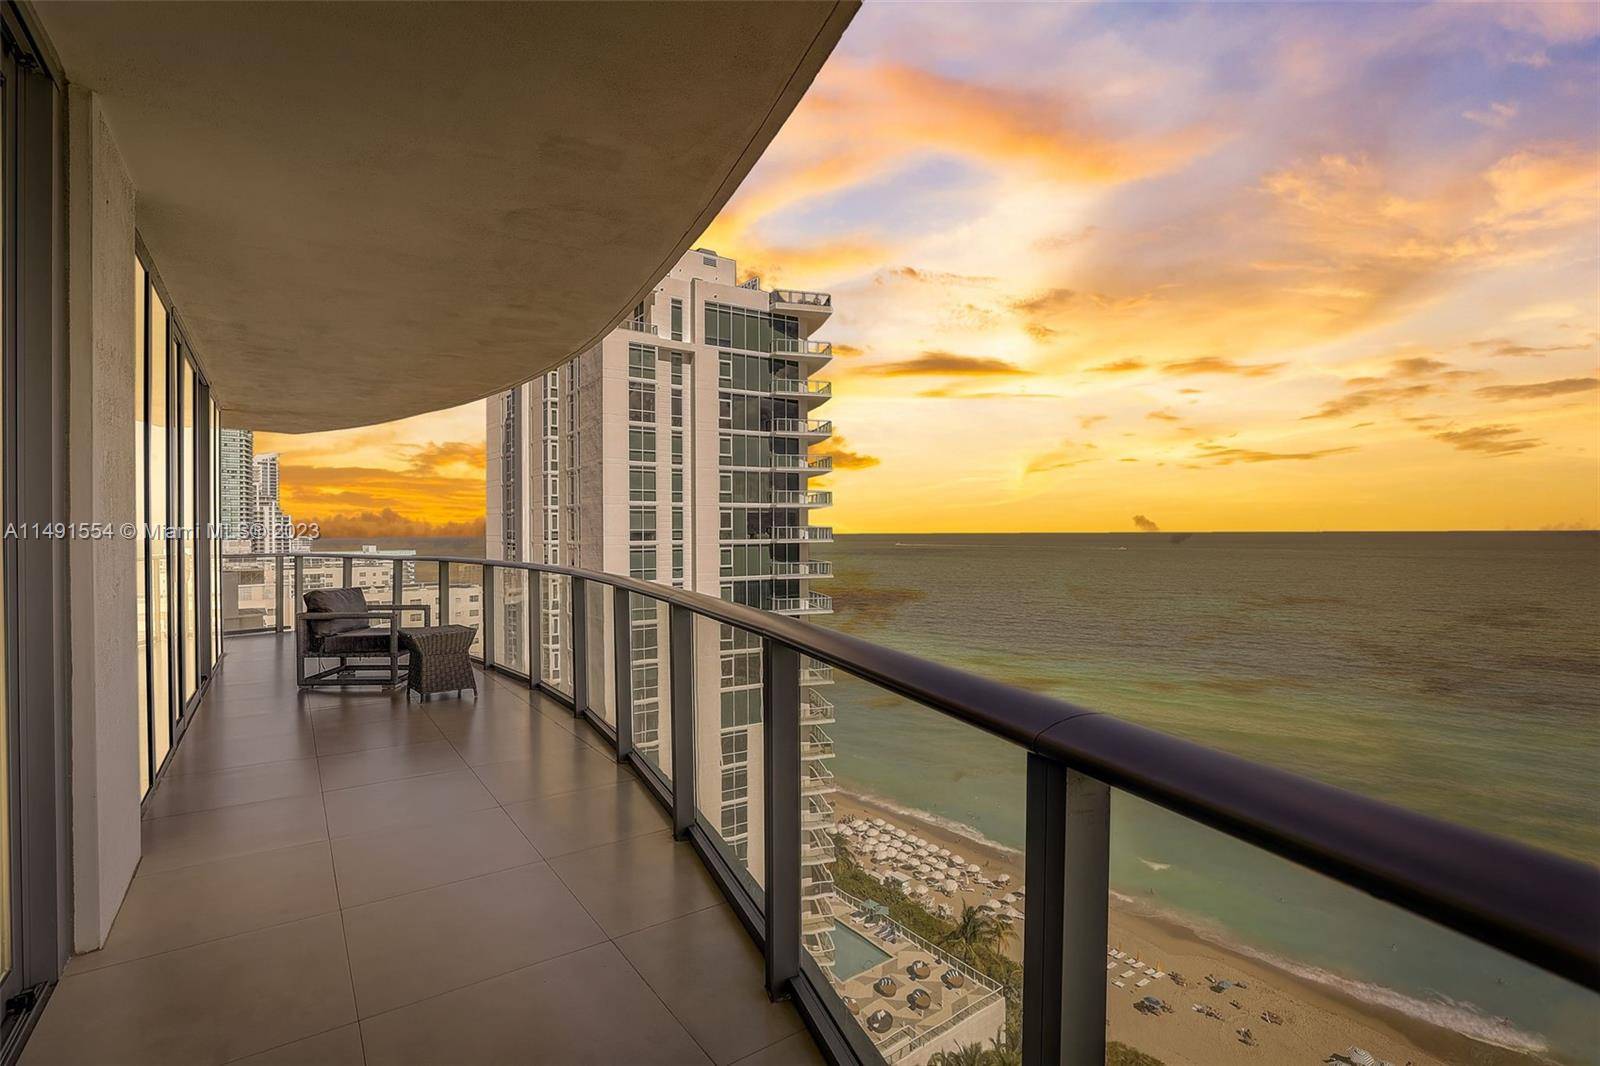 Spectacular 2 beds apartment to enjoy with friends or family, Hyde Beach Resort accommodates up to 6 adults Incredible apartment with direct ocean views, spacious, with top of the line ...